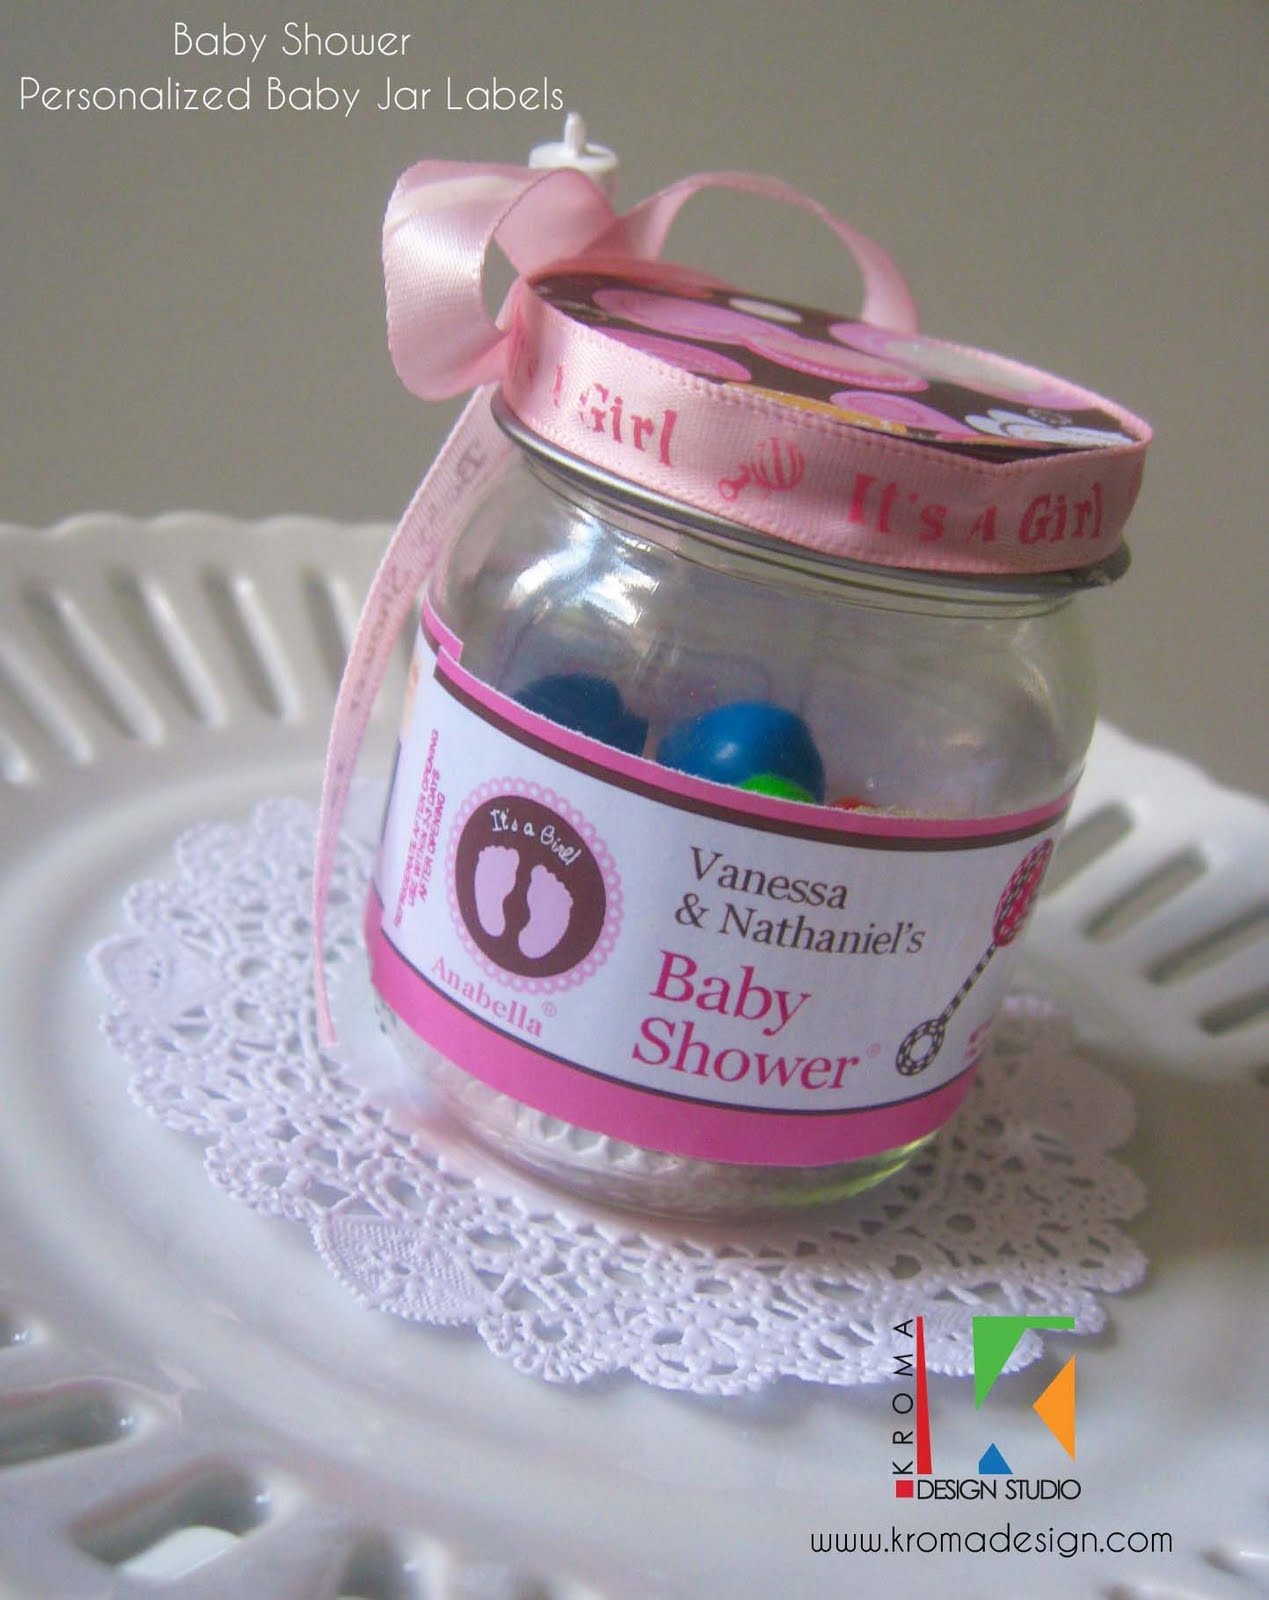 DIY Party Favors For Baby Shower
 Baby Showers DIY Printable Baby Jar Label Favors for